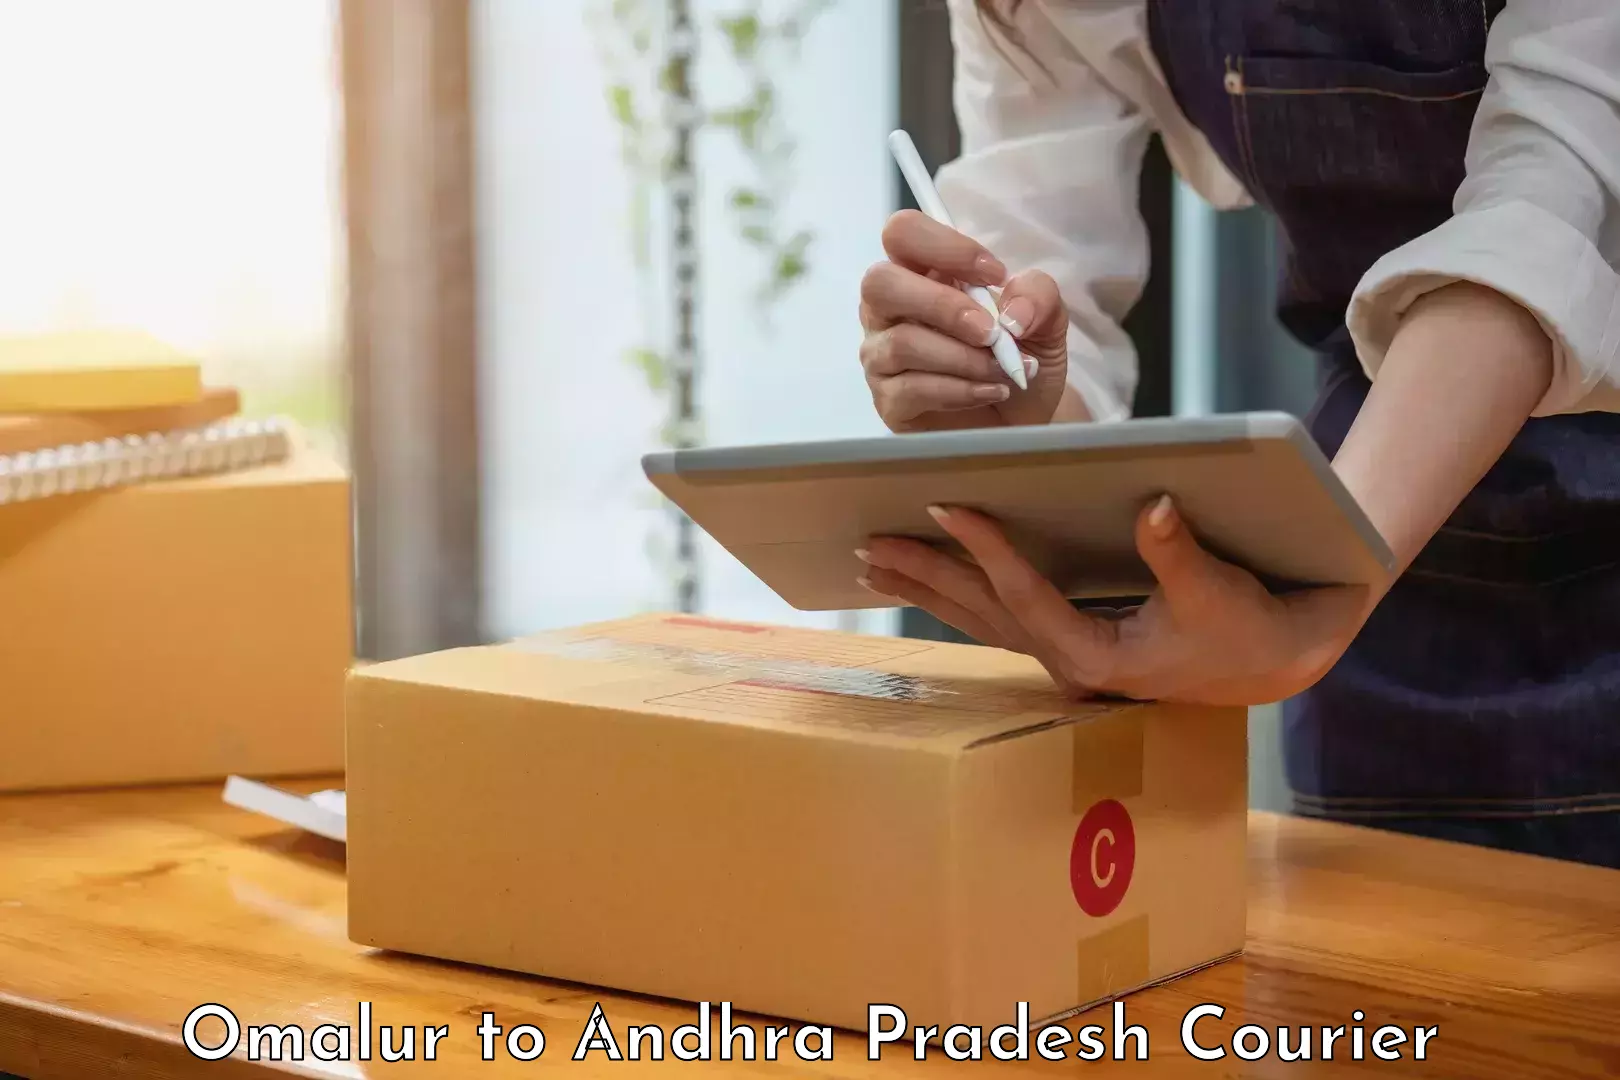 Express package delivery in Omalur to Macherla